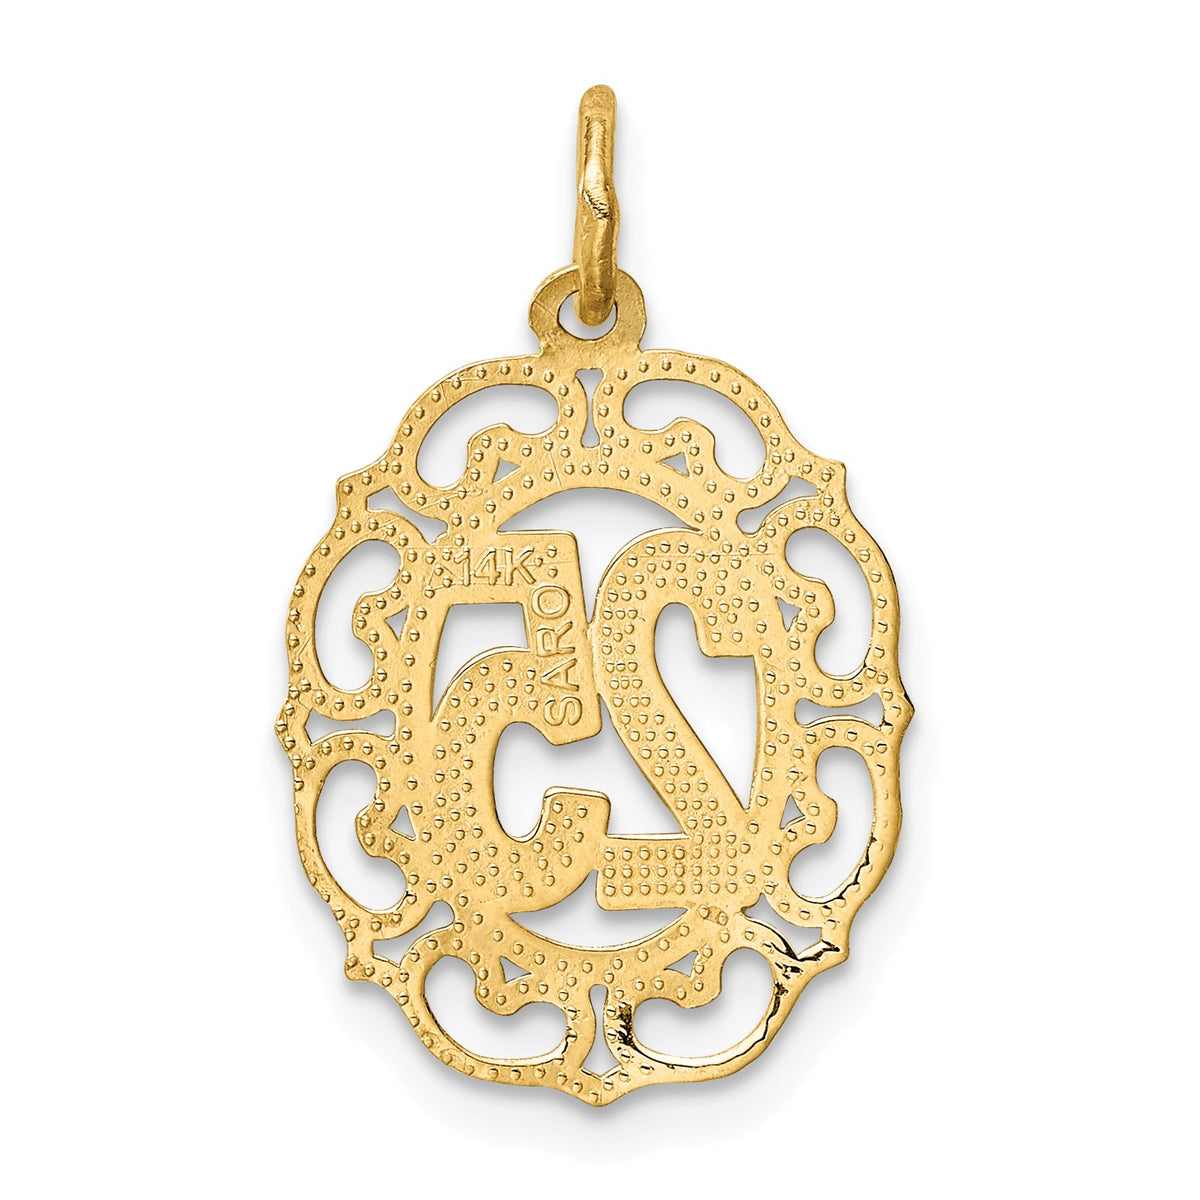 Alternate view of the 14k Yellow Gold 25 Oval Charm or Pendant, 14mm by The Black Bow Jewelry Co.